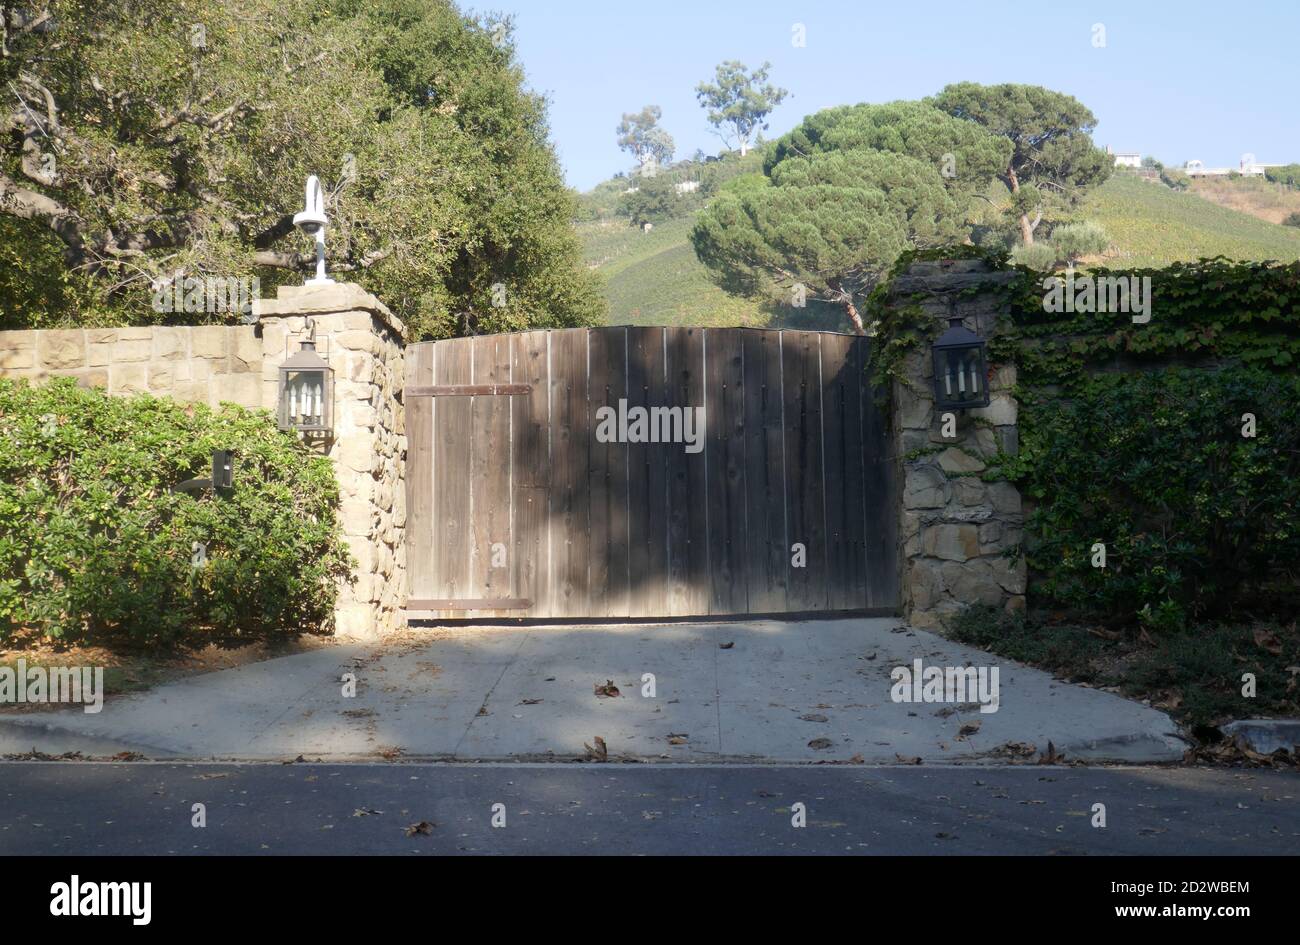 Bel Air, California, USA 6th October 2020 A general view of atmosphere of director Victor Fleming's former home at 1070 Moraga Drive on October 6, 2020 in Bel Air, California, USA. Photo by Barry King/Alamy Stock Photo Stock Photo